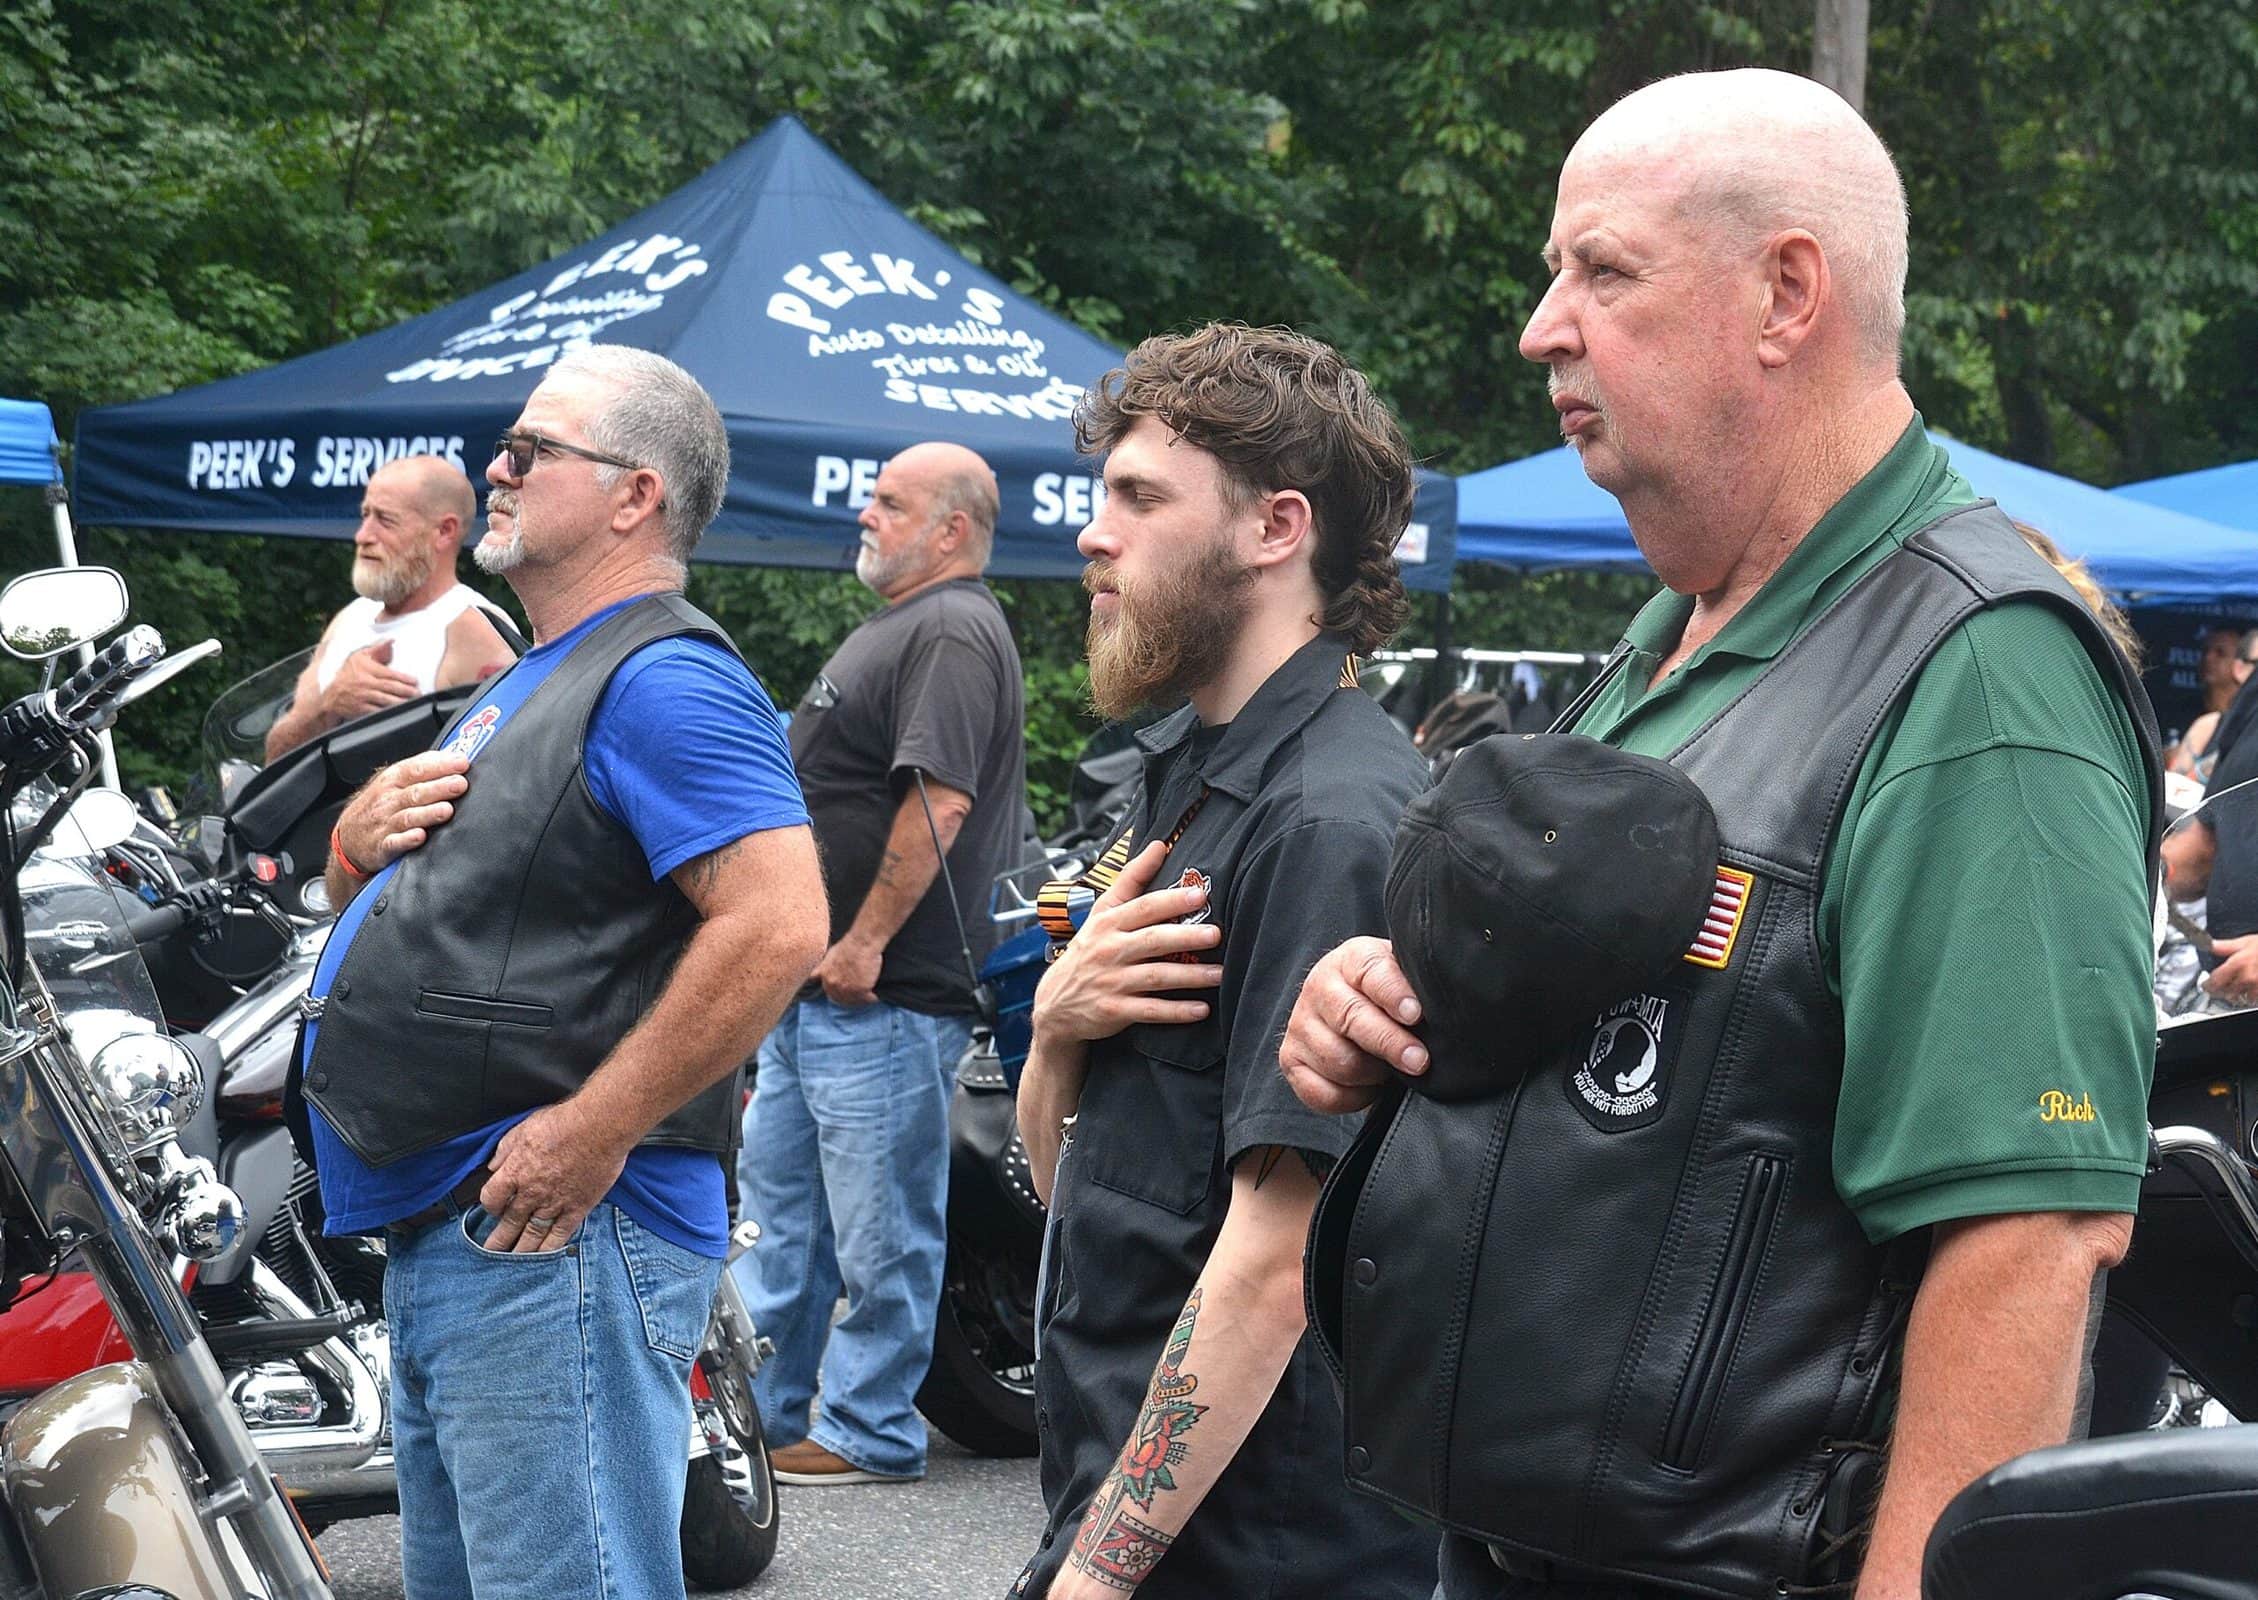 Loyal supporters welcome the return of the SJL Memorial Ride